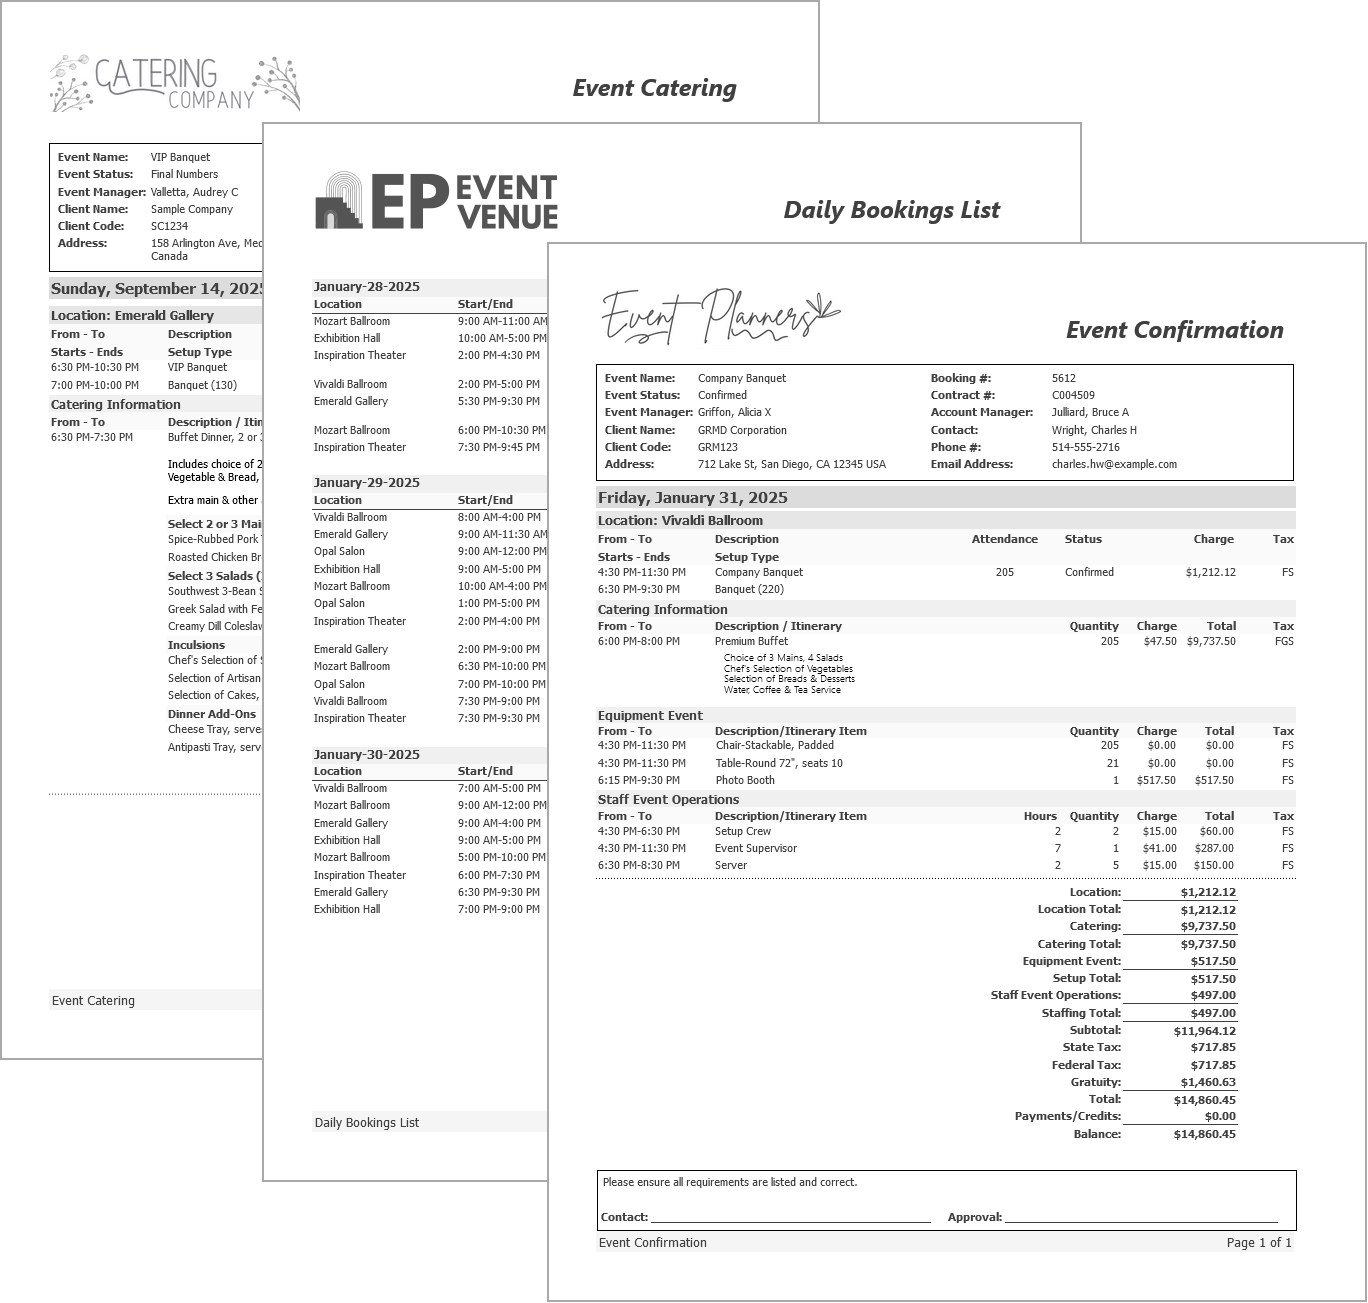 EventPro Reports: Just a few examples of EventPro’s many included, professionally designed reports. Simply add your logo, or further customize reports with the Report Designer. Print, save to file, or email reports directly from EventPro.